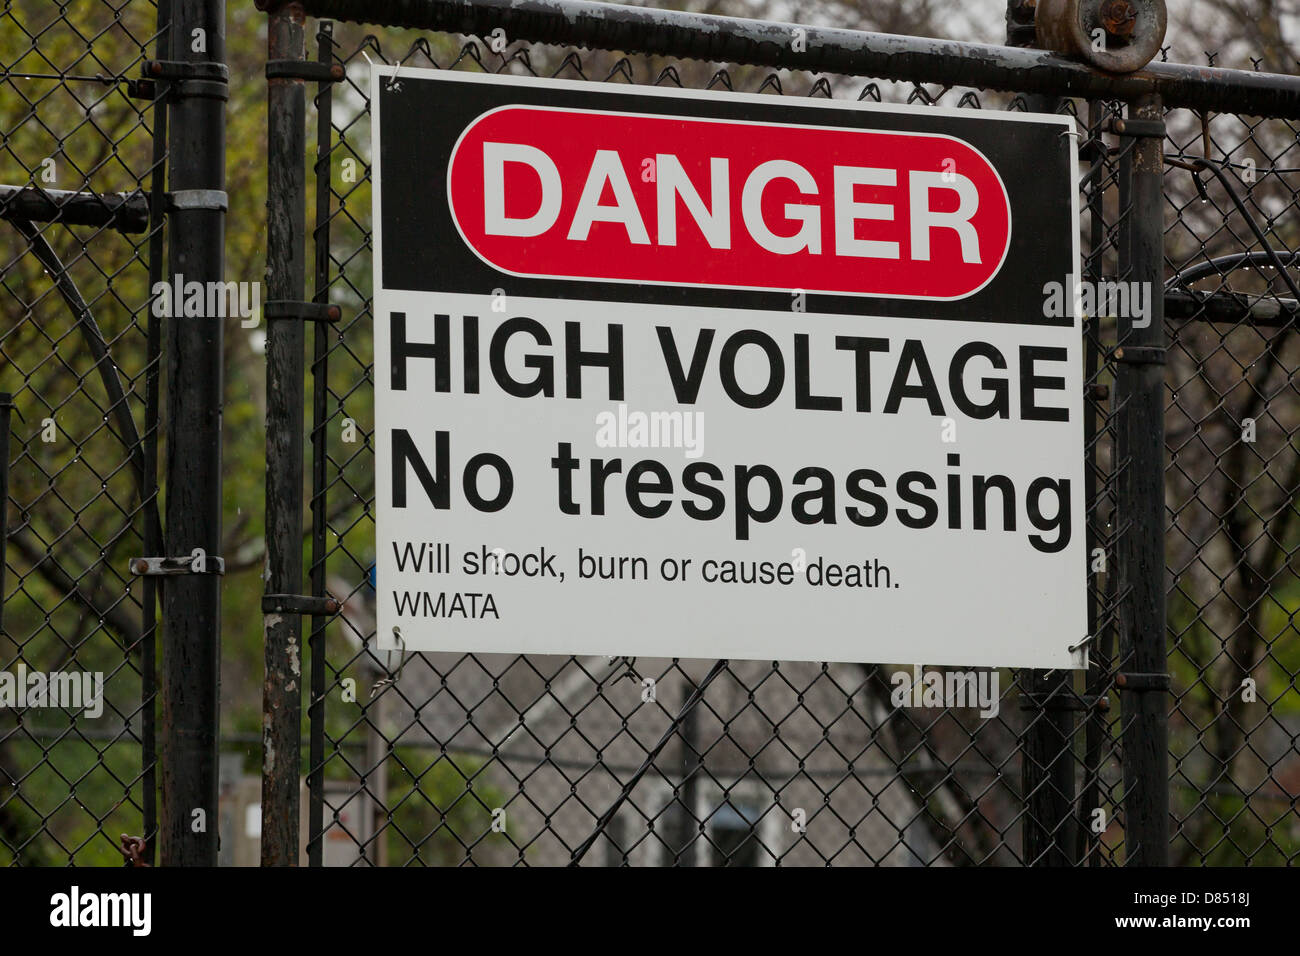 High voltage warning sign - USA Stock Photo